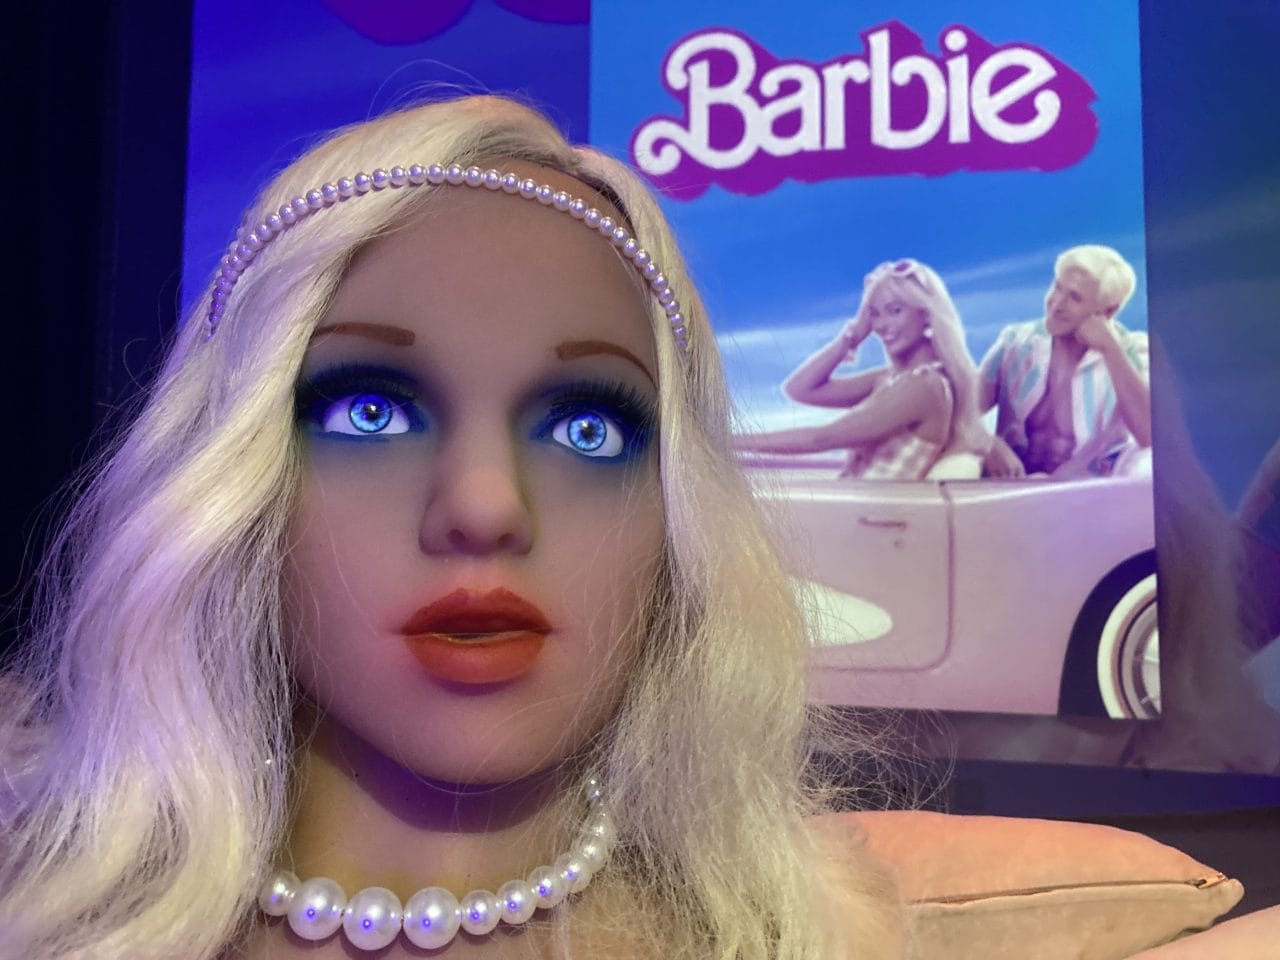 A Barbie doll is sitting in front of a television at the Barbie Cyberbrothel.